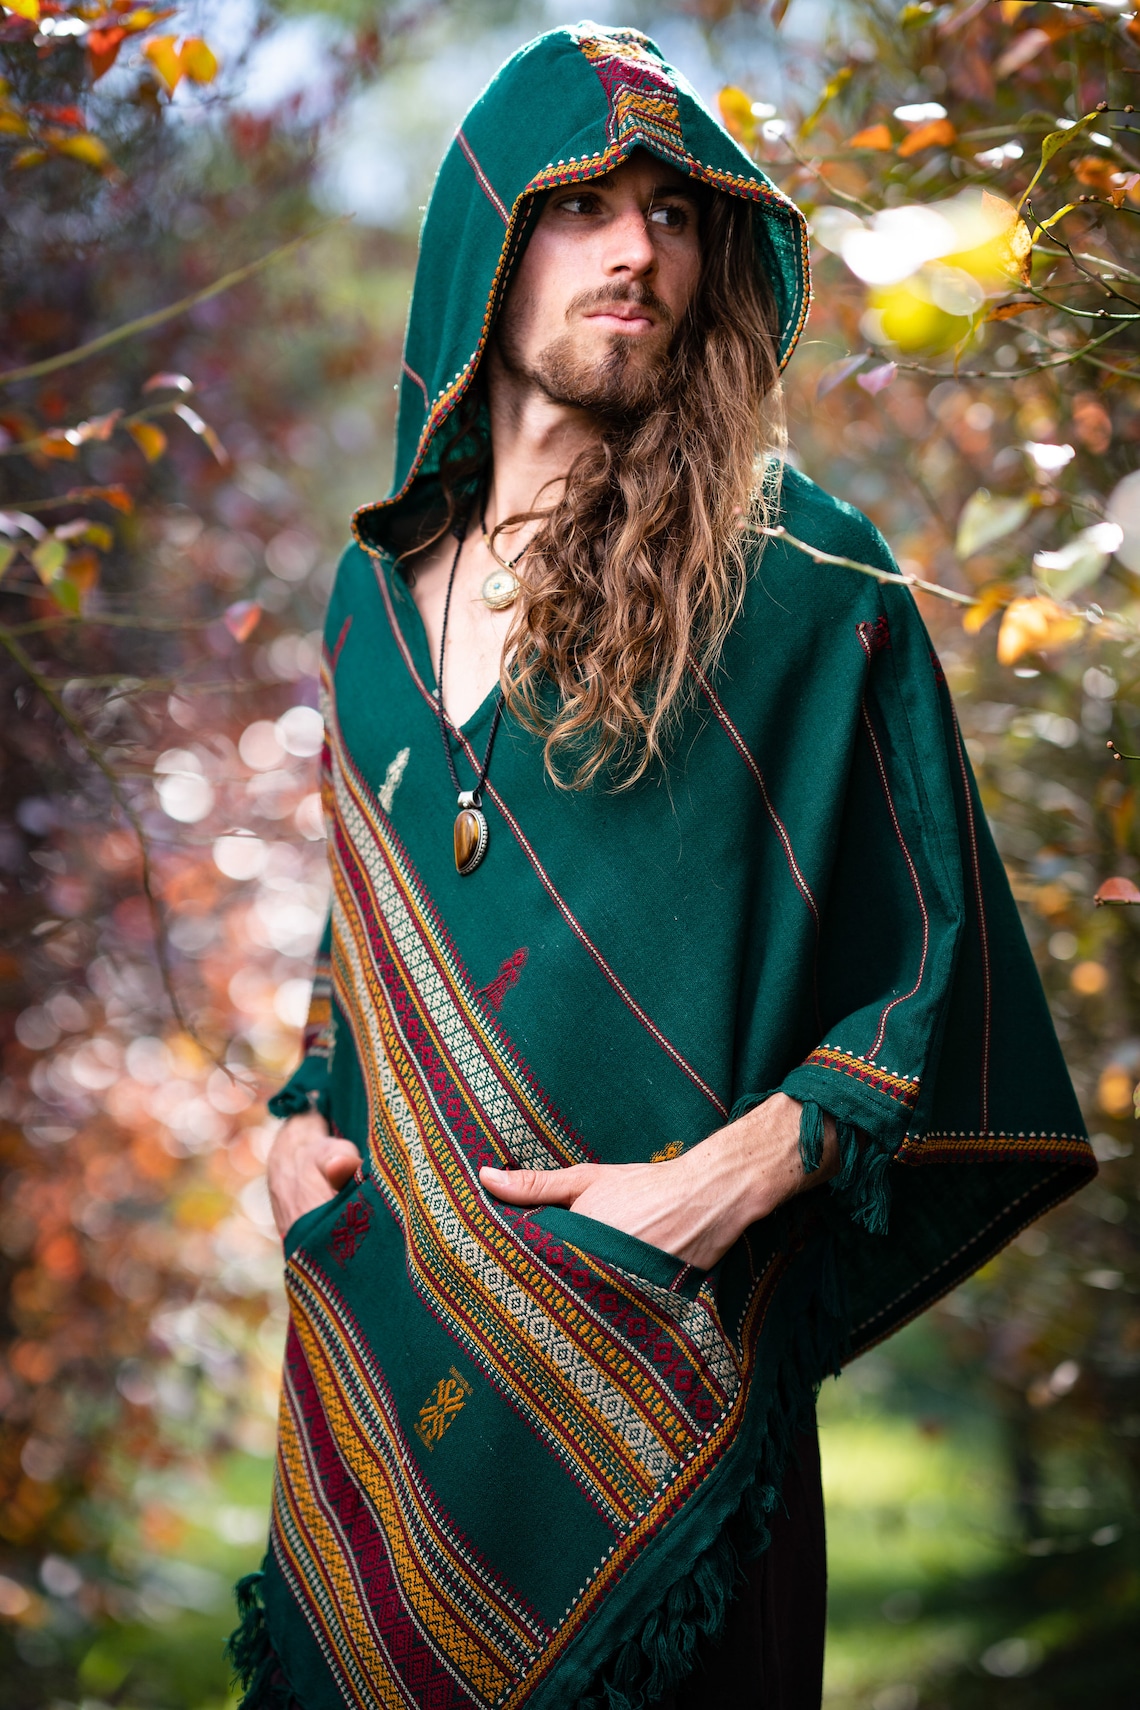 Mens Hooded Poncho Green Cashmere Wool Pockets Tribal | Etsy